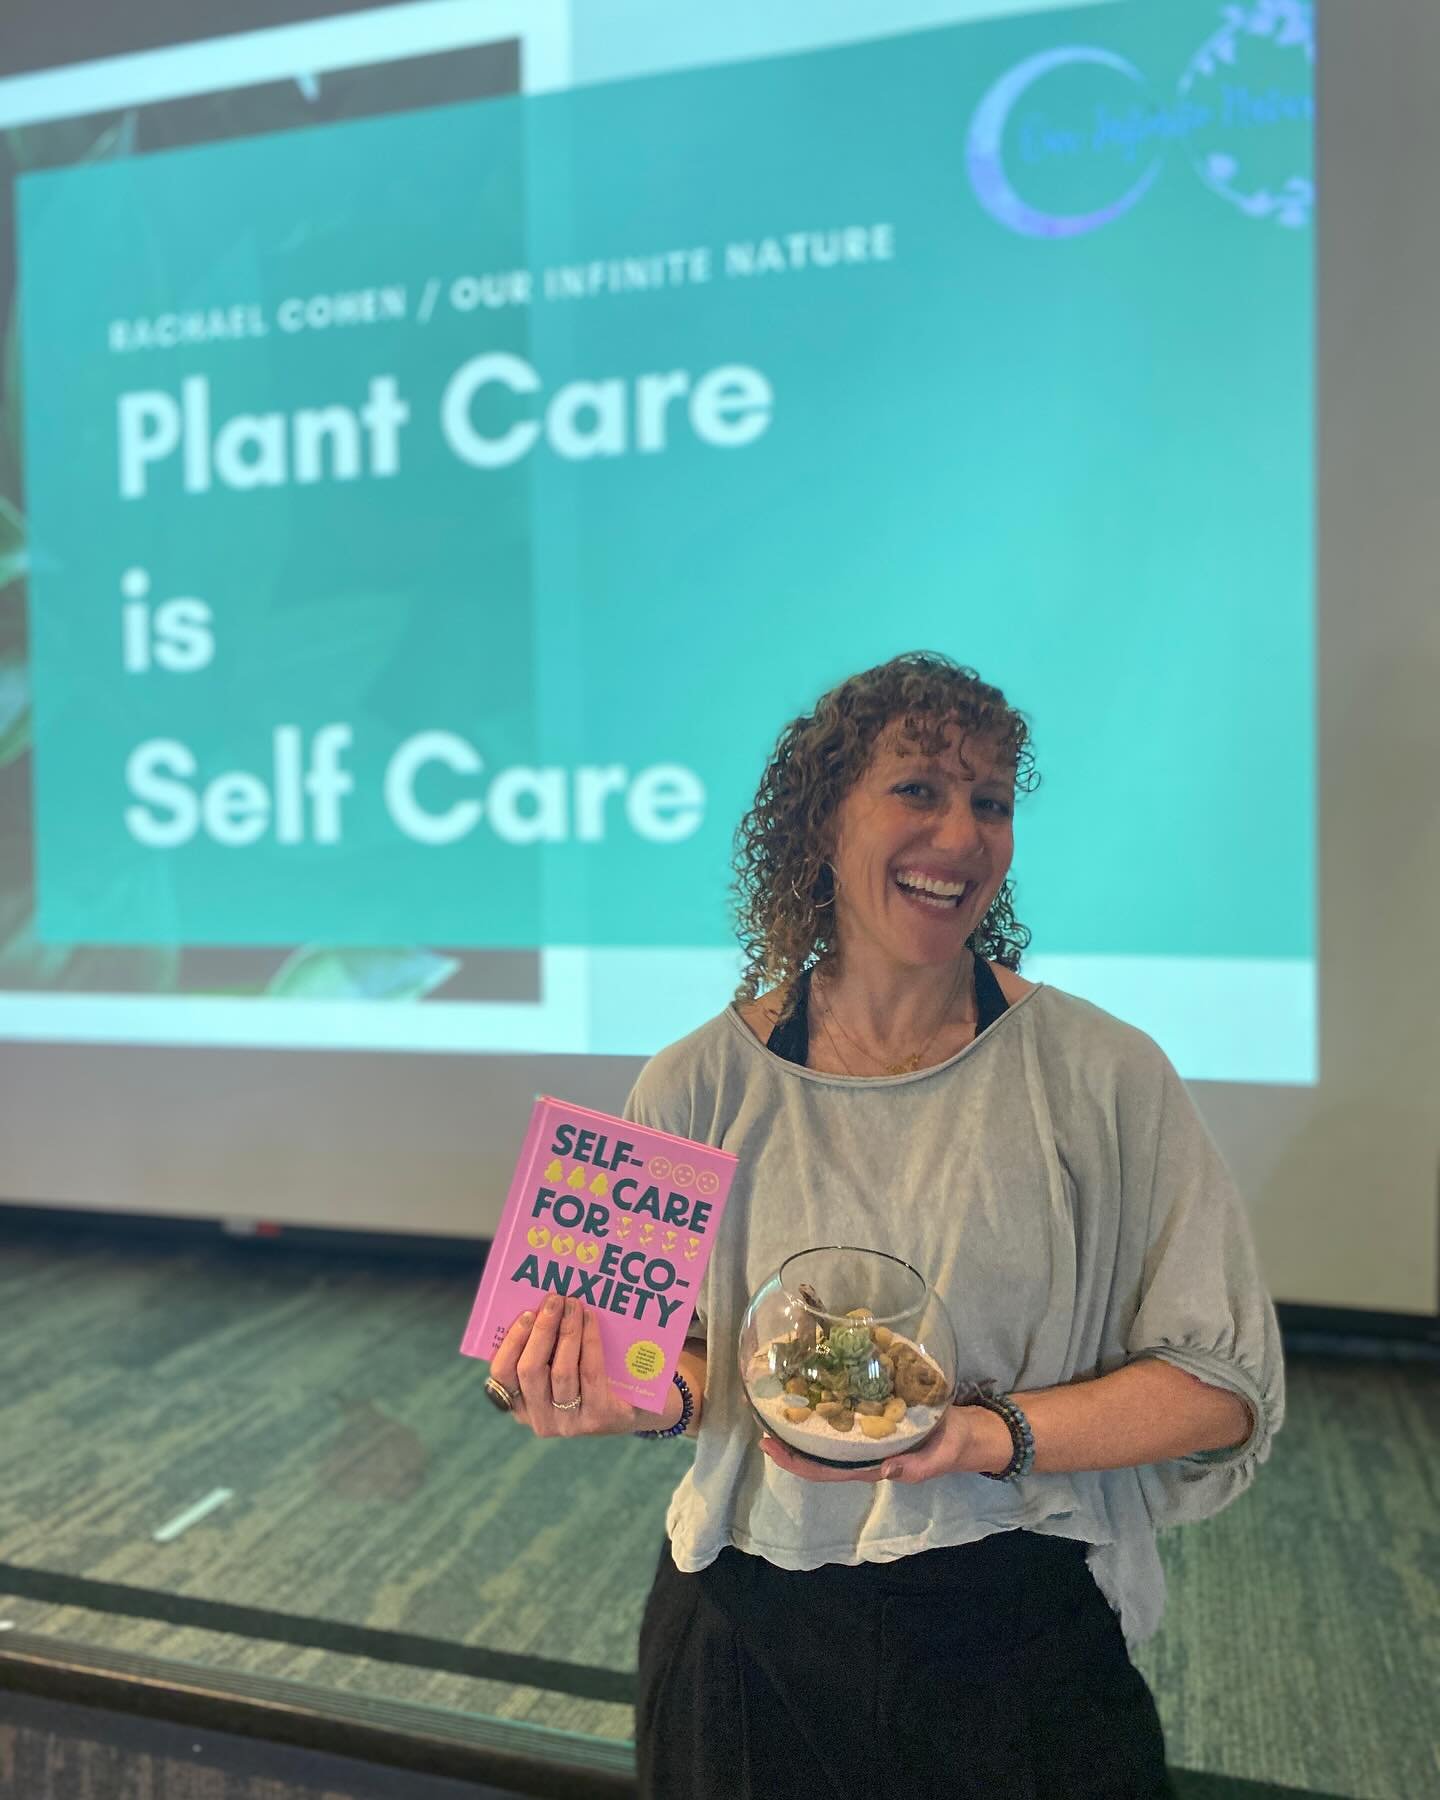 Happy one month &ldquo;birthday&rdquo; to my latest book, Self-Care for Eco-anxiety: 52 weekly practices for positive, personal change through the power of Nature!

Learn how to care for yourself, mind, body and soul as you also strengthen your relat